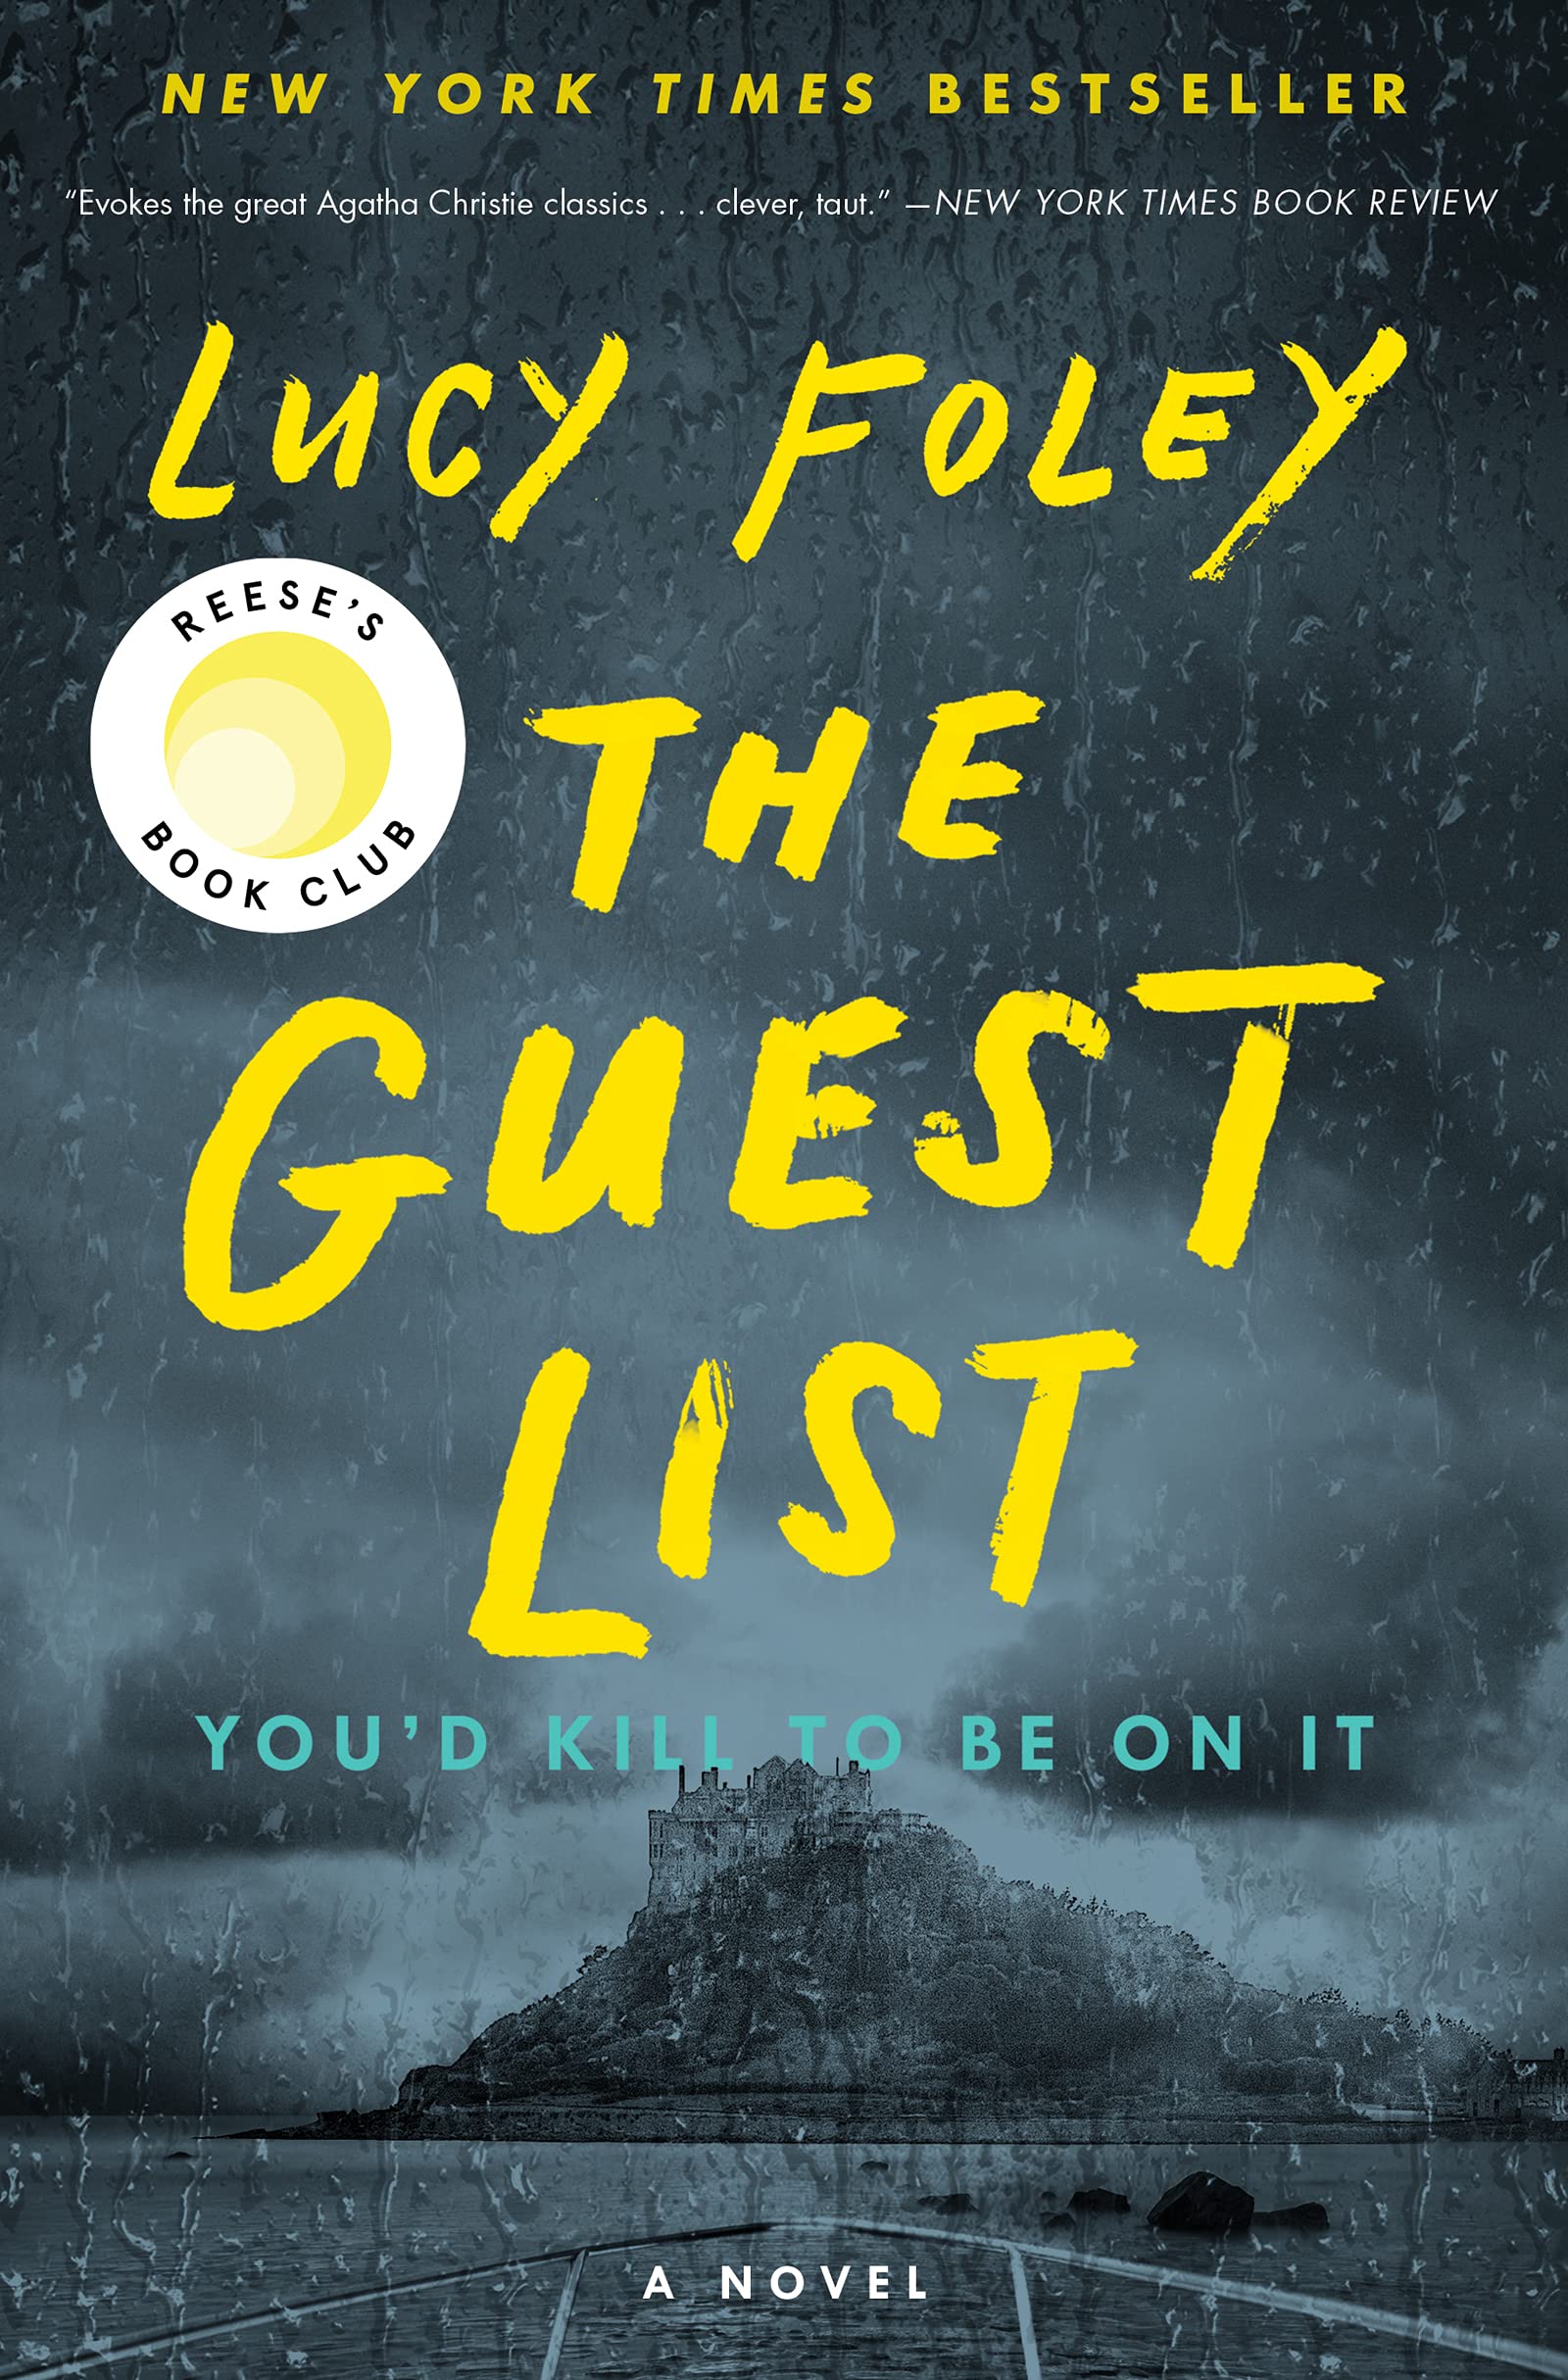 image of "The Guest List" book cover